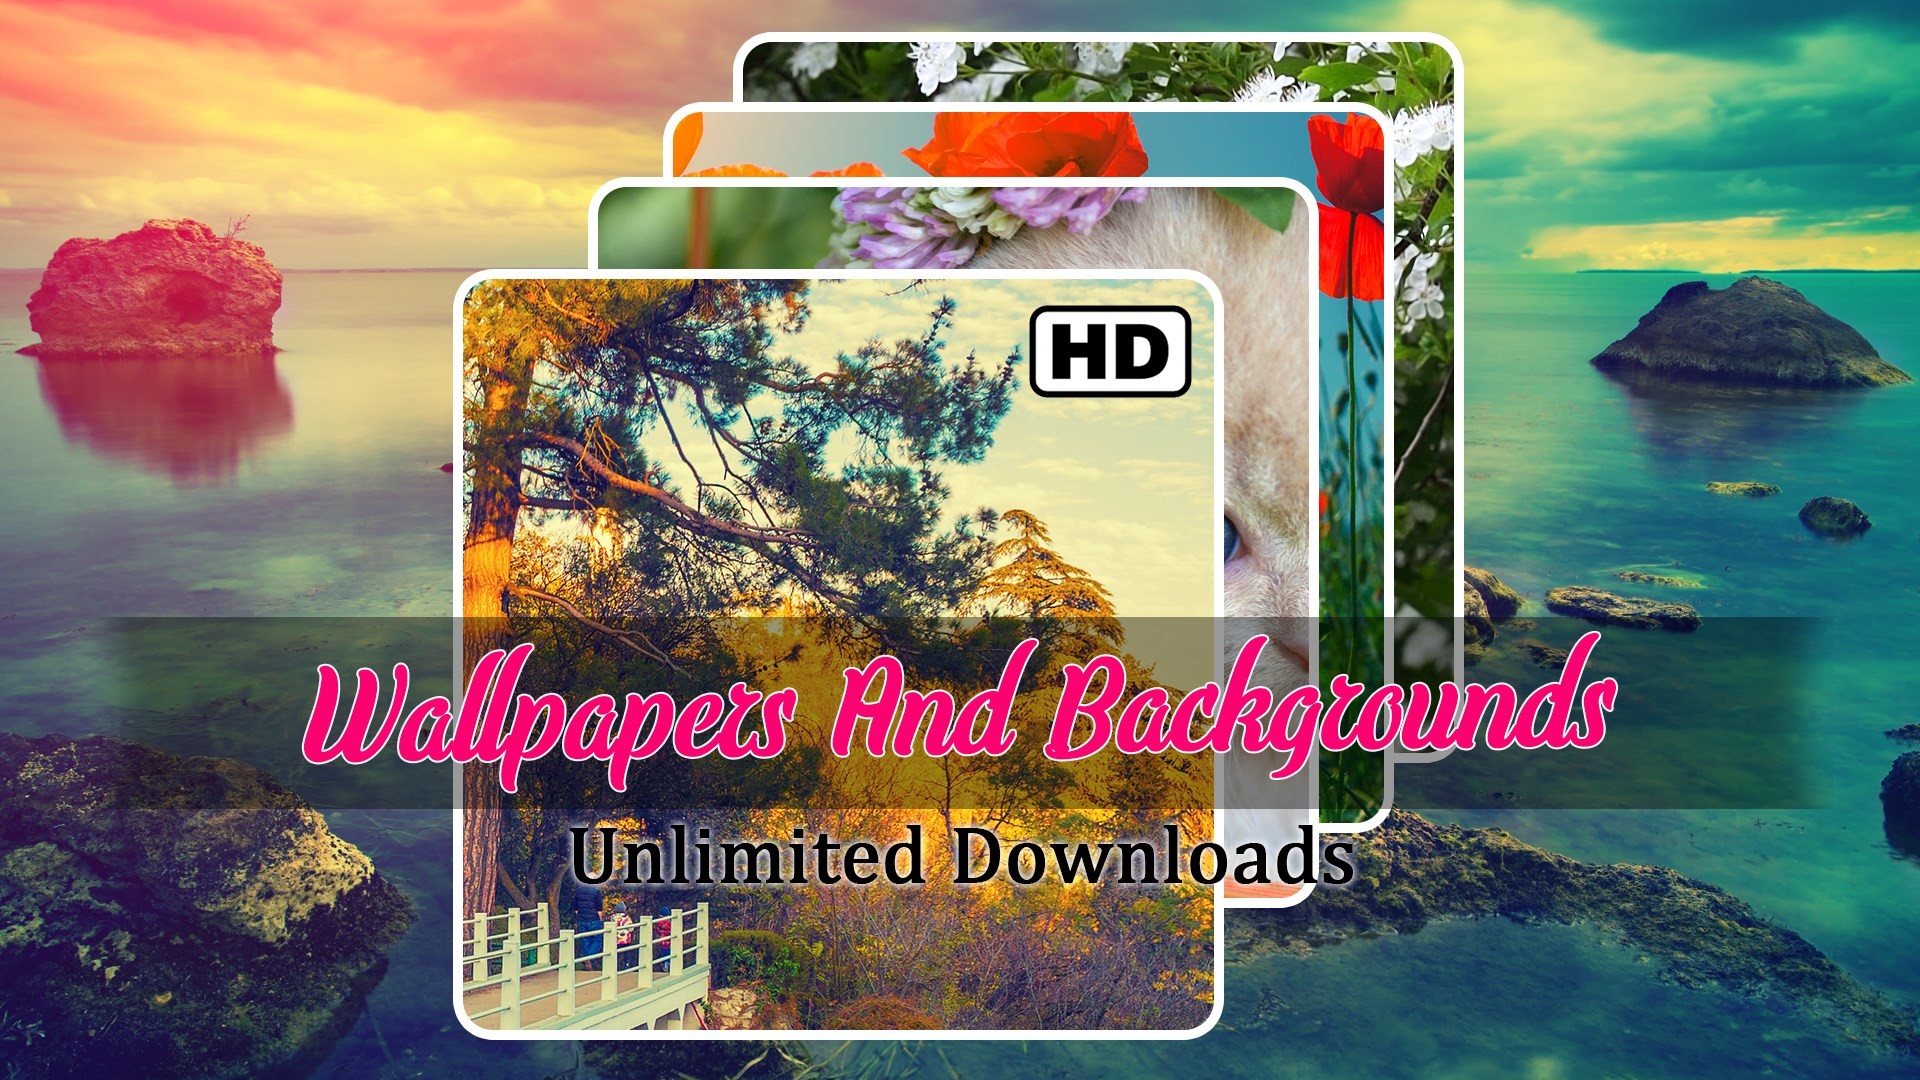 1920x1080 Wallpapers and BackGrounds HD & SplashScreen ,LockScreen Unlimited HD  Images Free